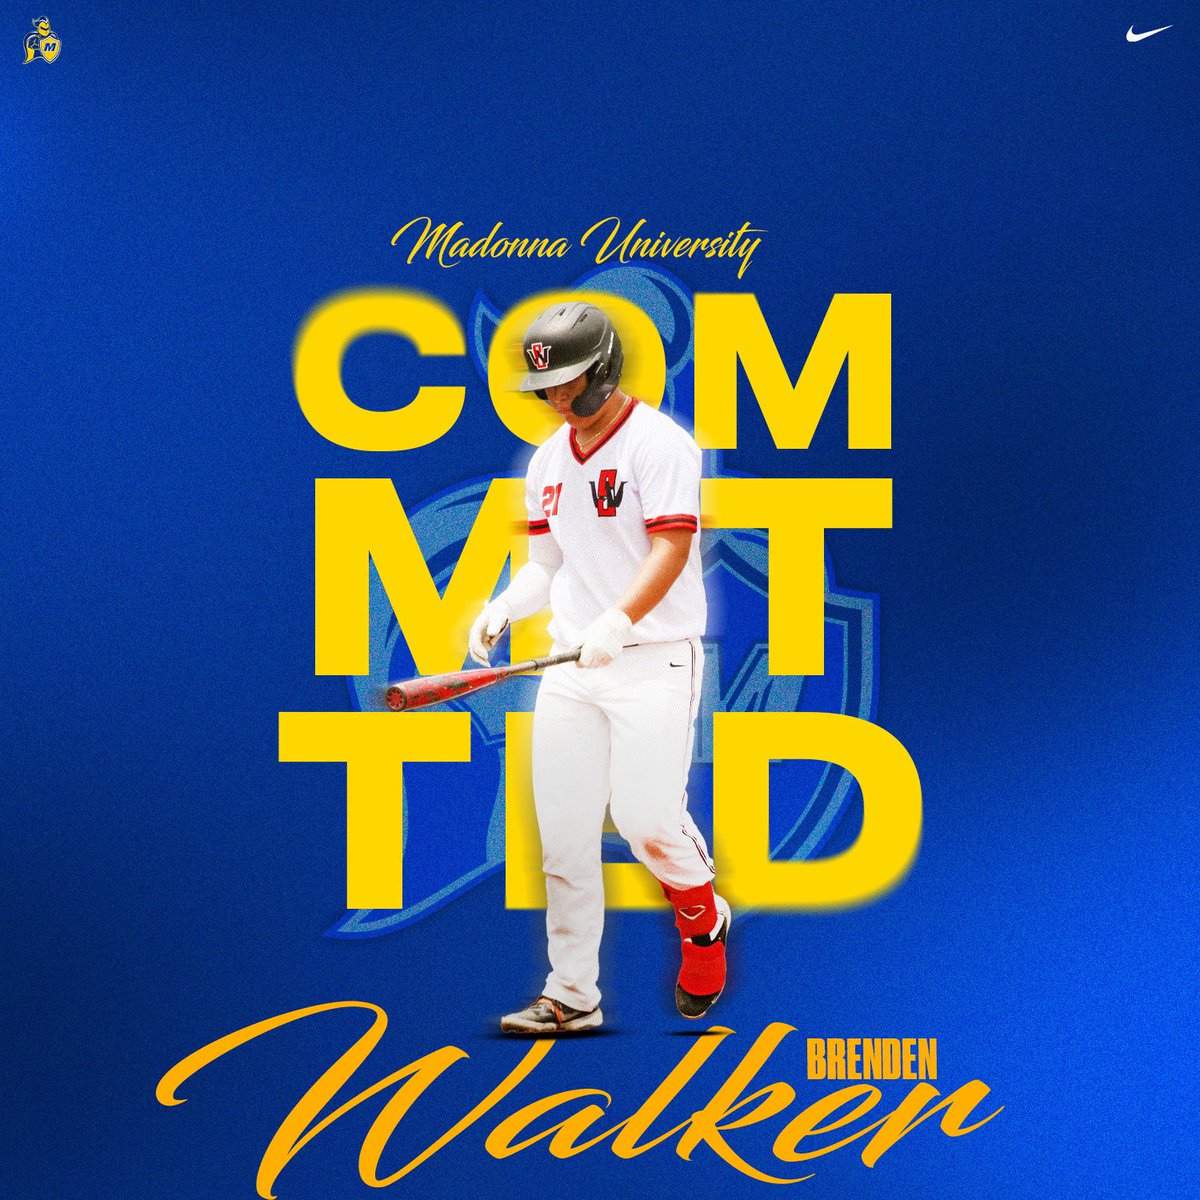 I’m excited to announce that I will be continuing my athletic and academic career at Madonna University! I would like to thank my family along with all my coaches. I would also like to thank Coach Punches for the opportunity to play at the next level. 💛💙 #crusadernation